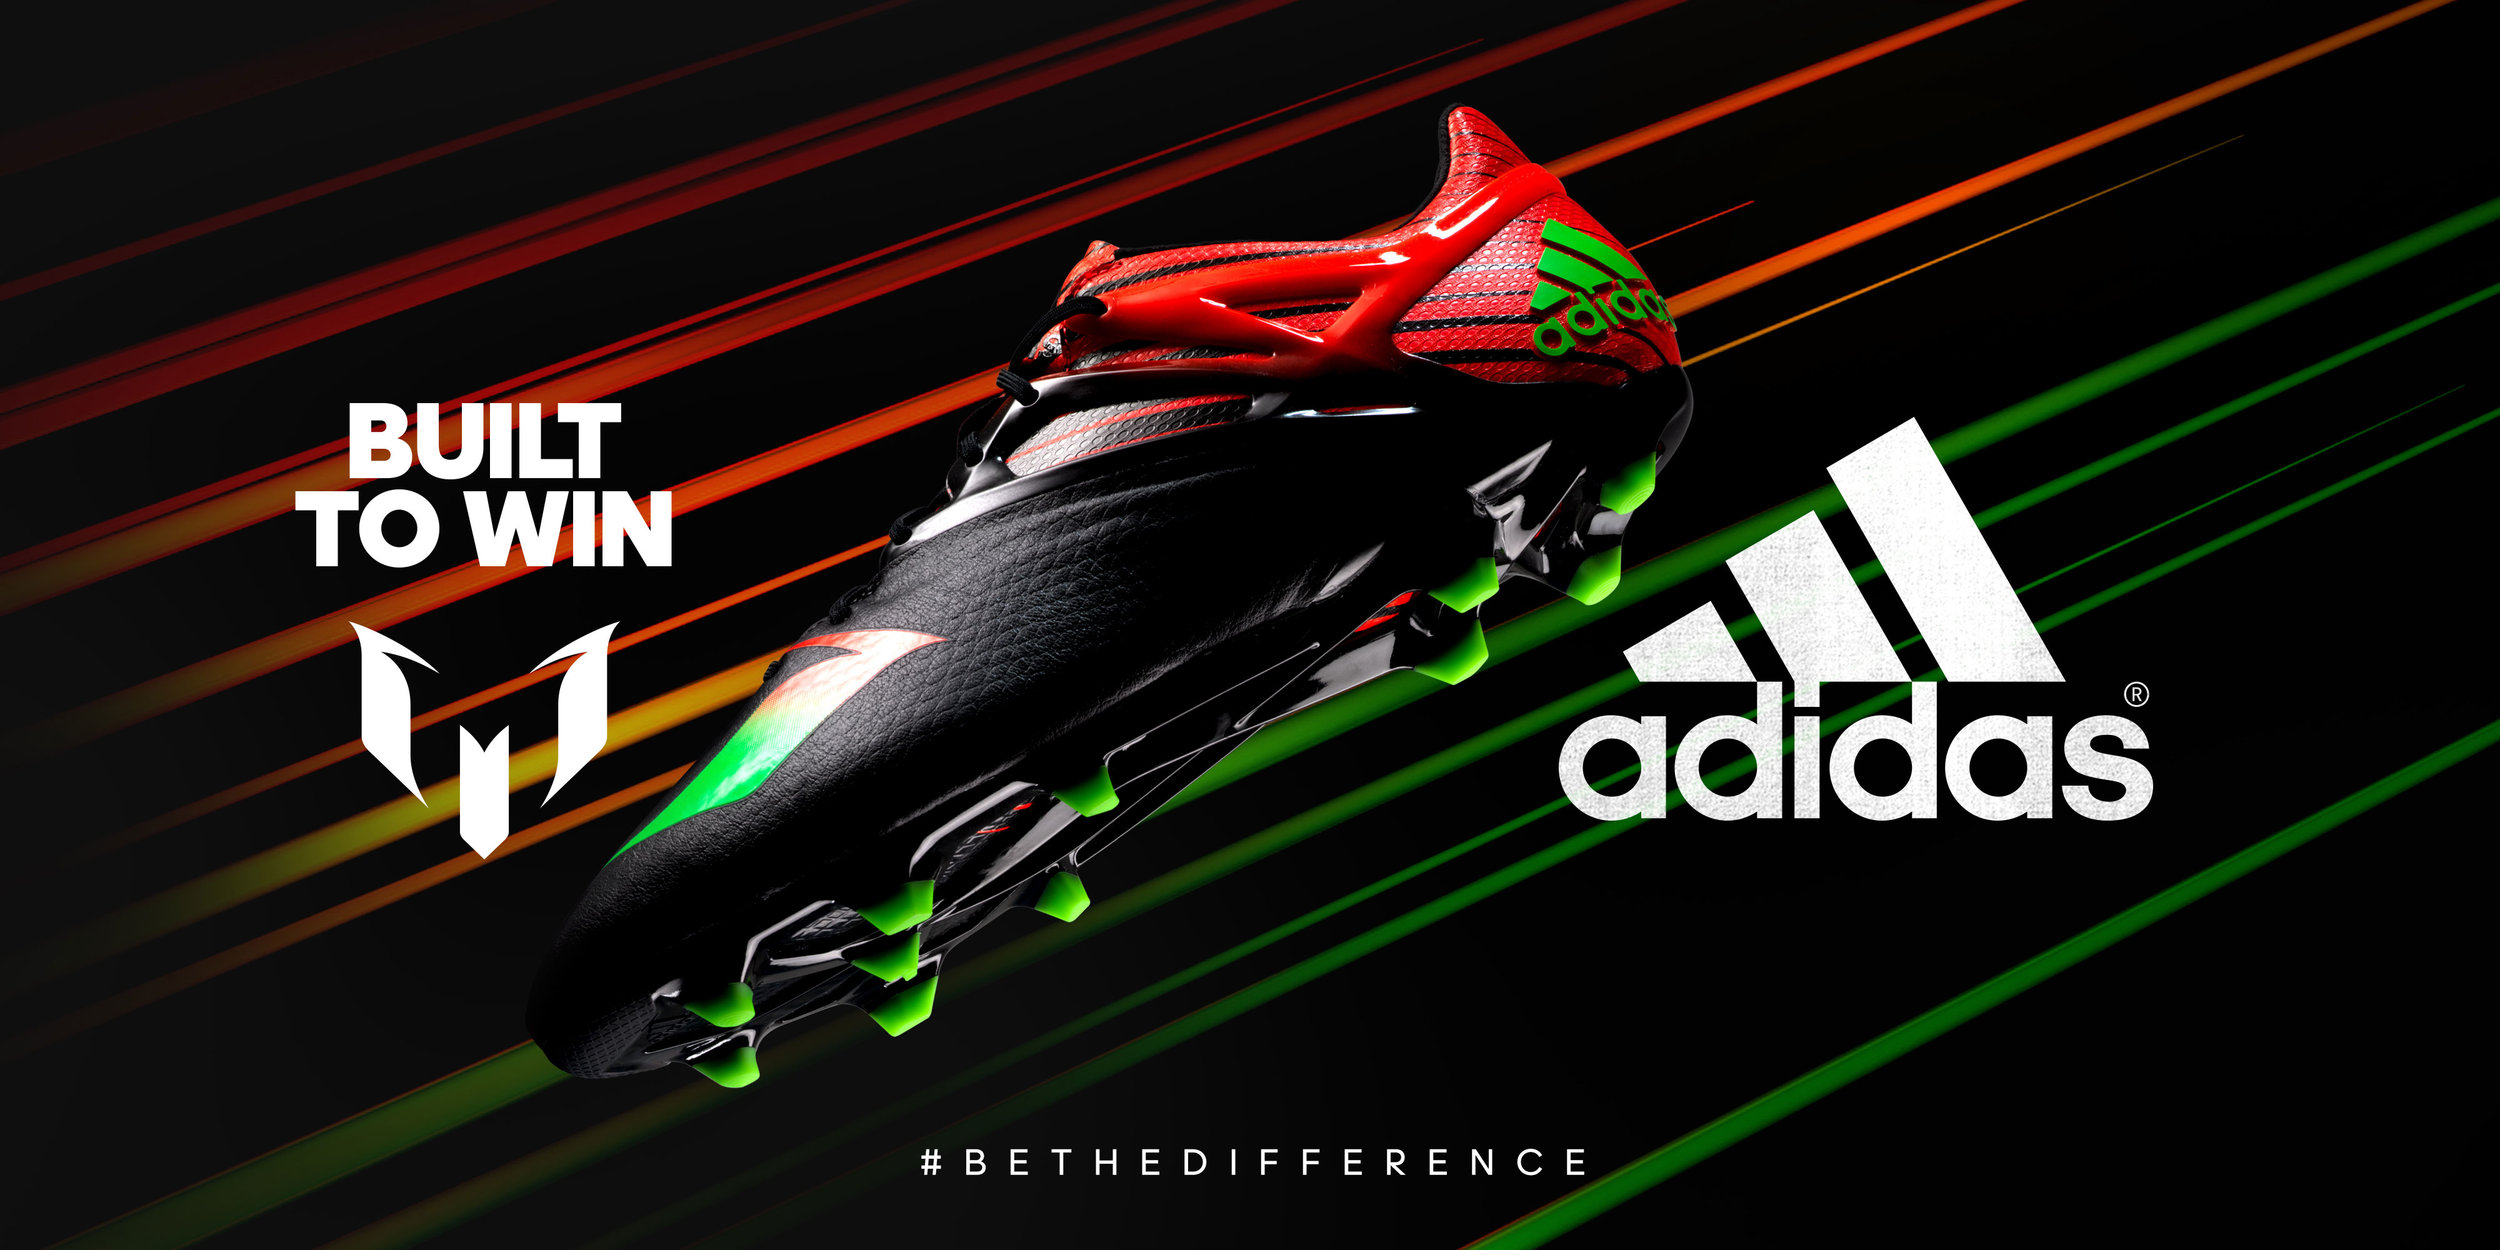 adidas built to win